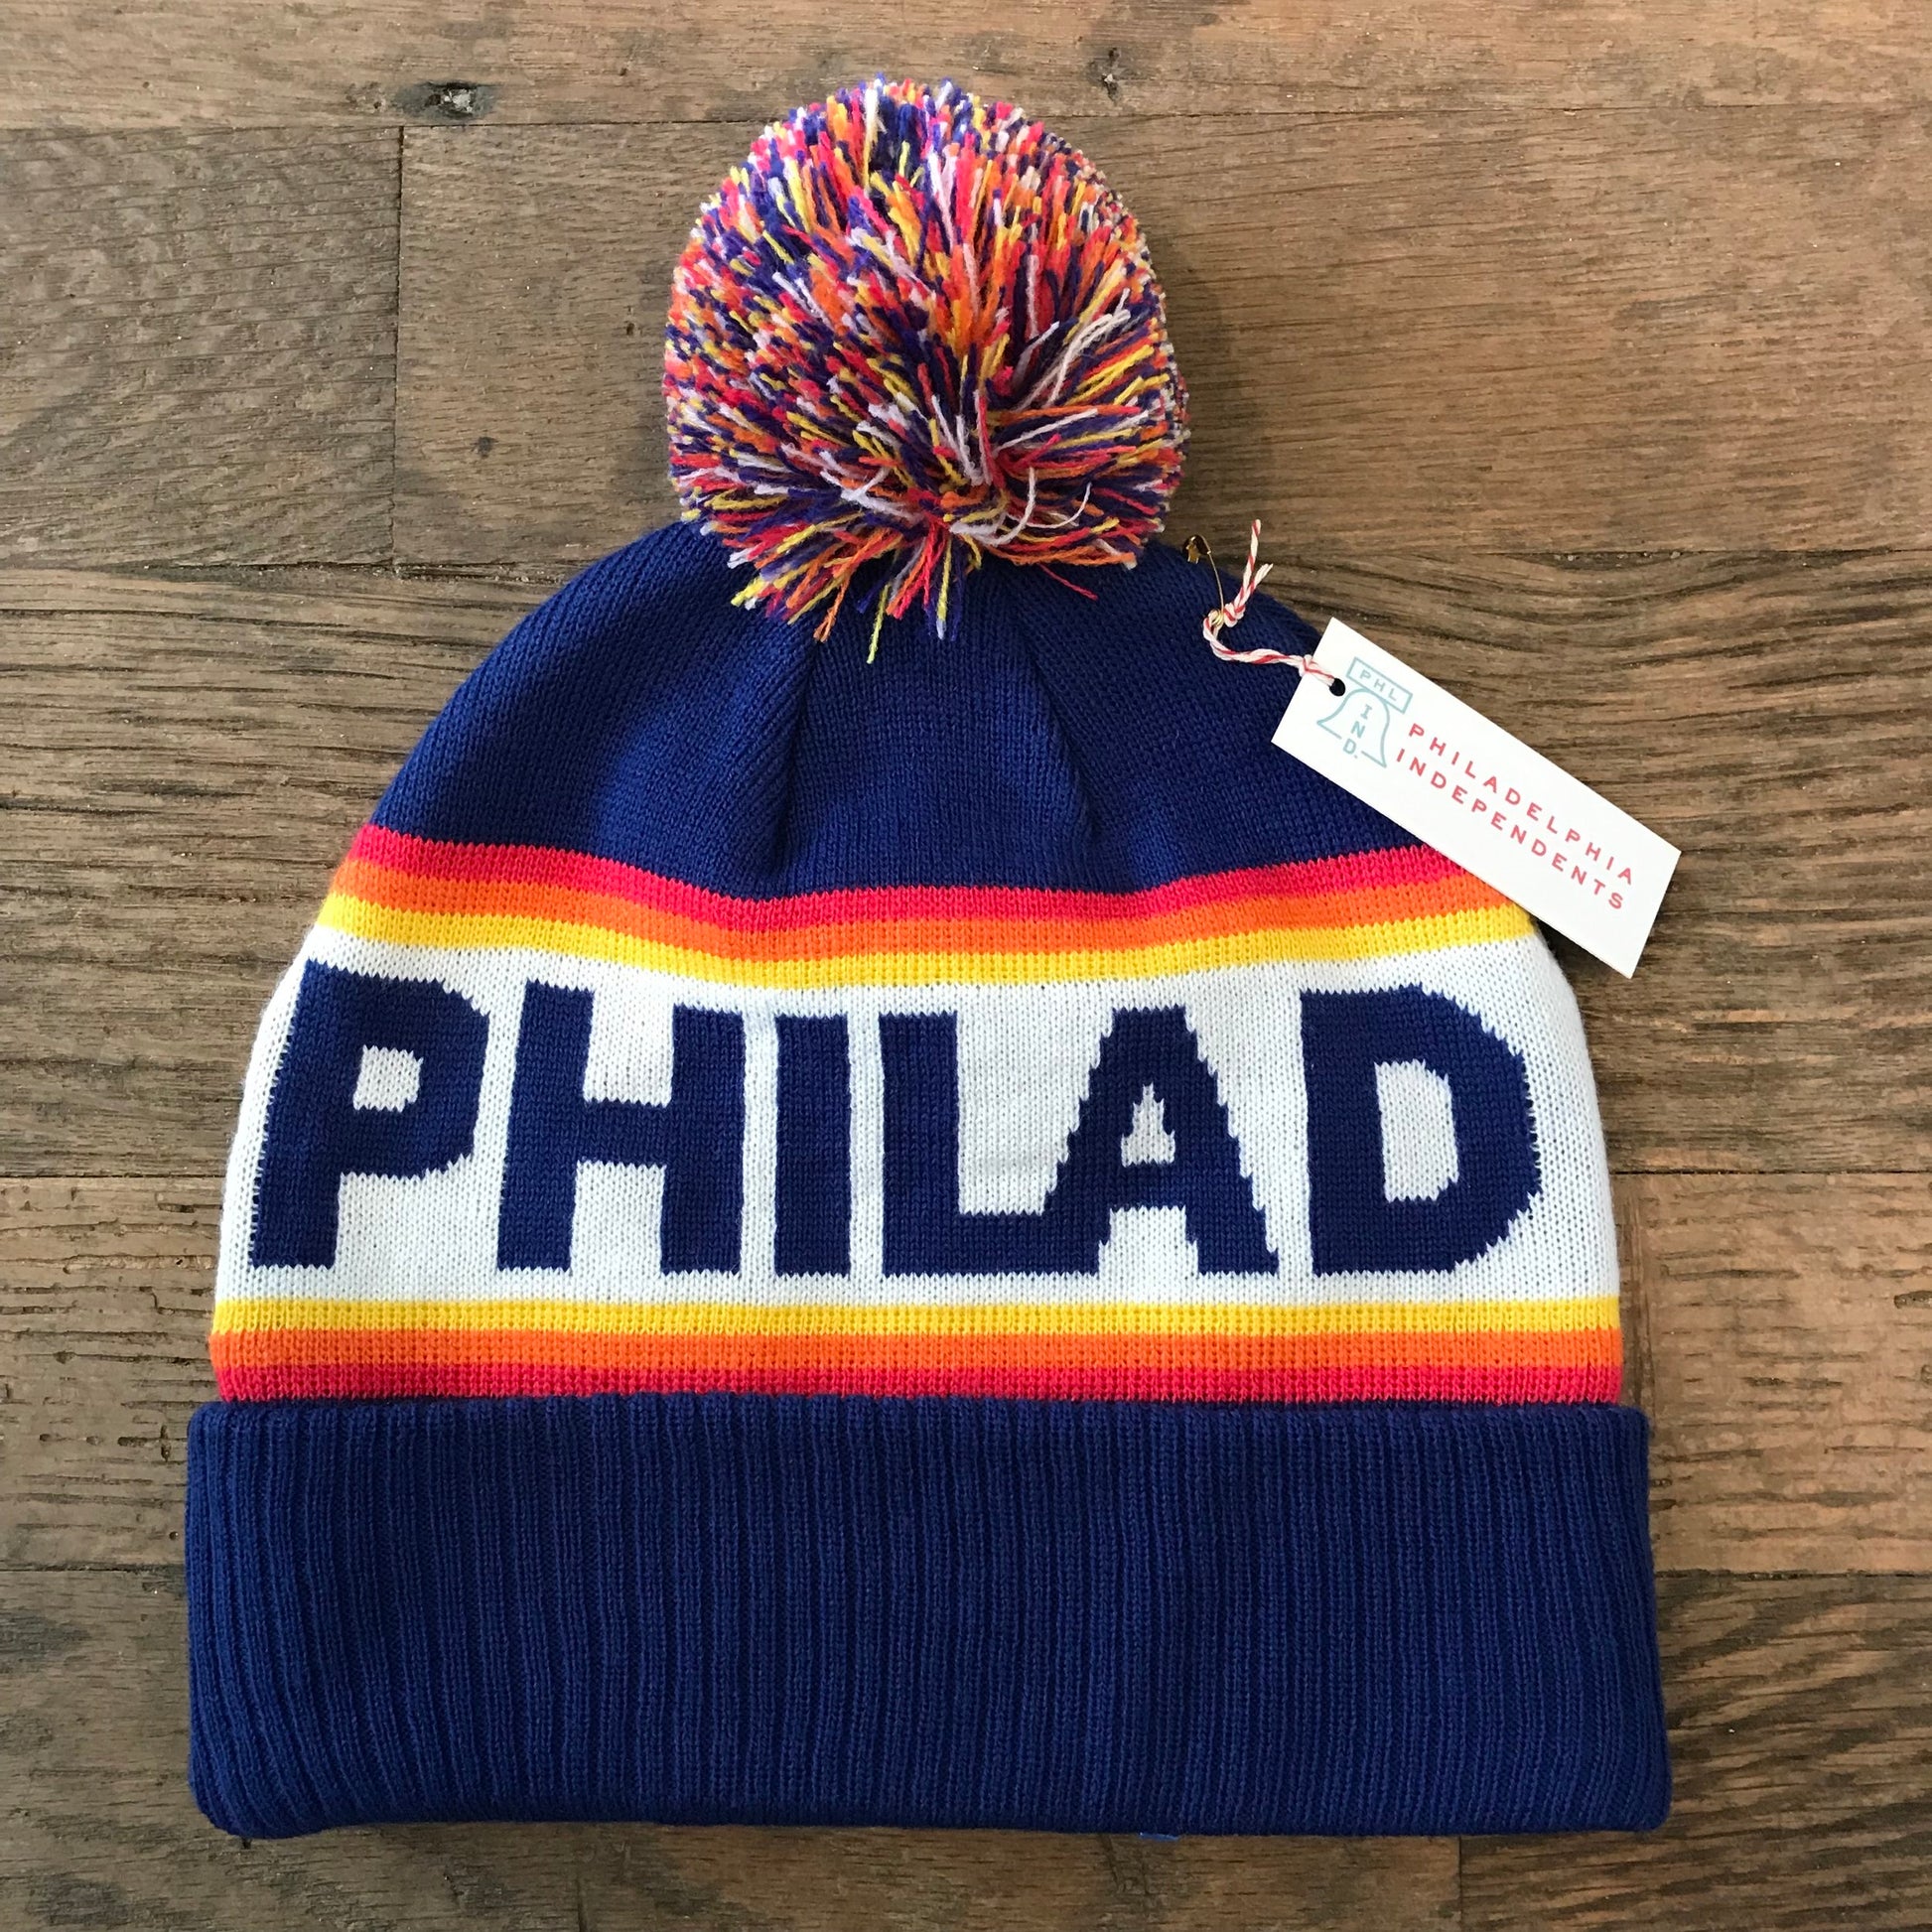 New blue double-sided knit Philadelphia Beanie with colorful pom-pom and "South Fellini" text lying on a wooden surface.